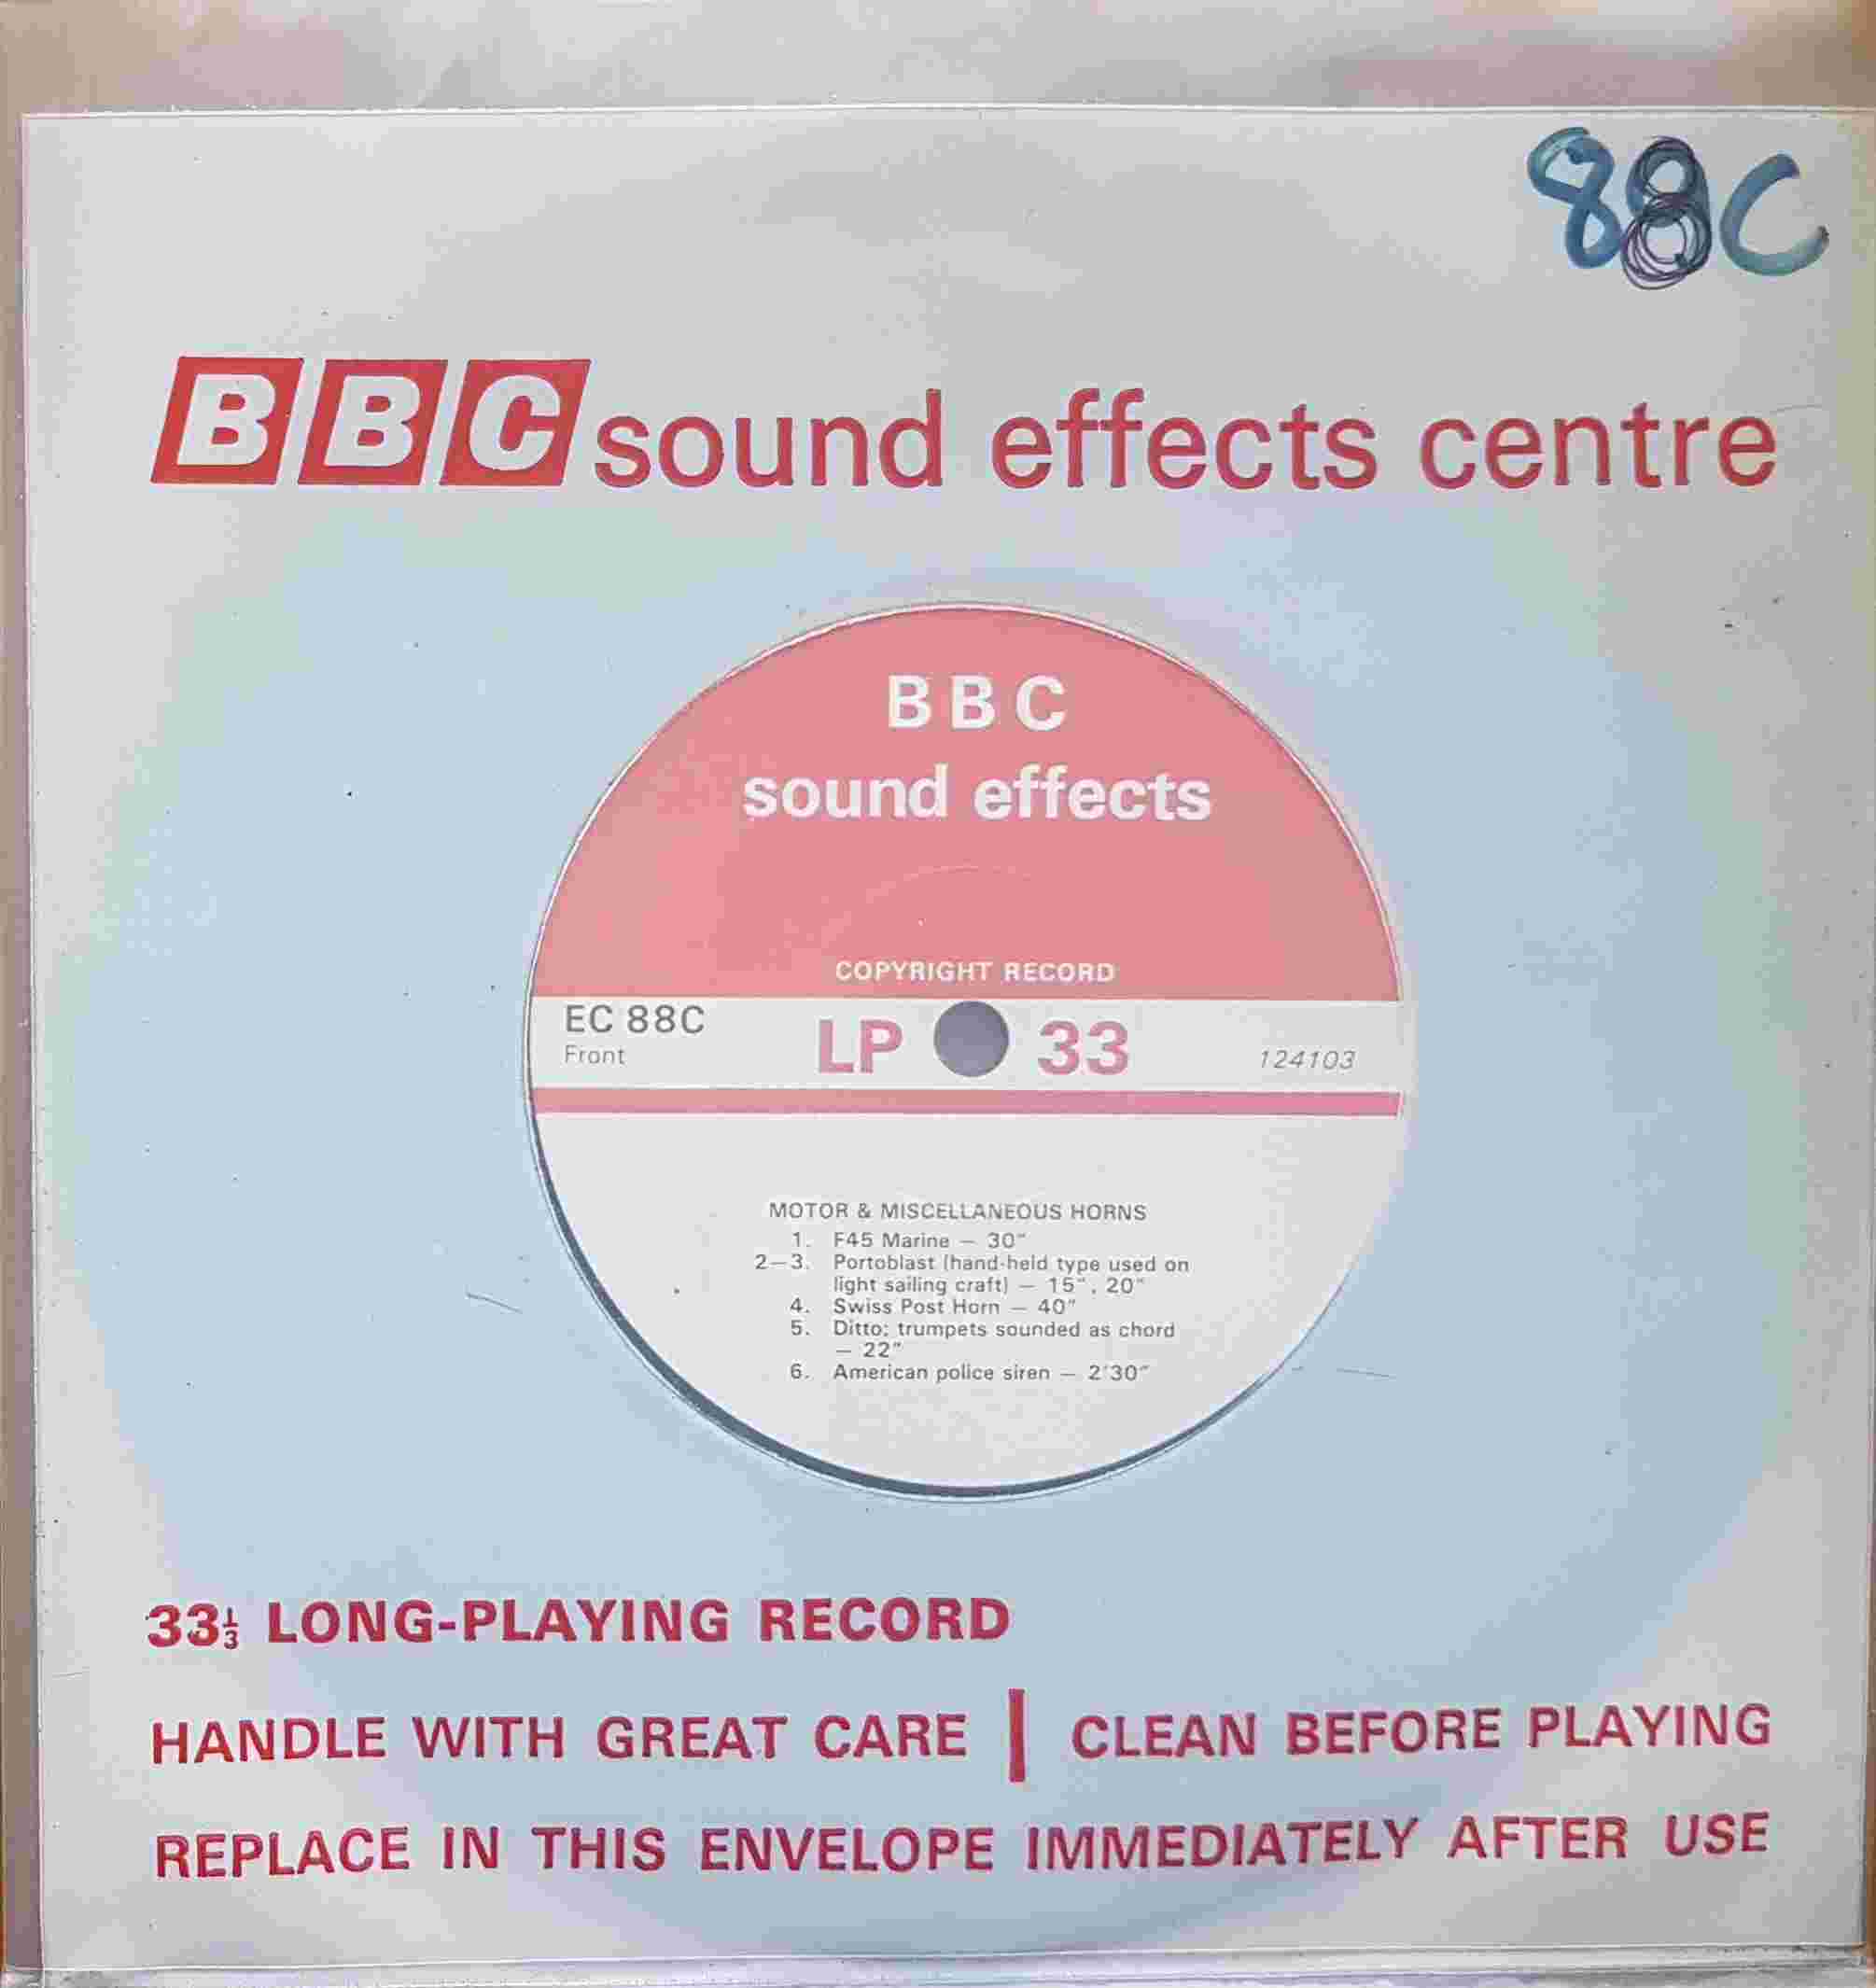 Picture of EC 88C Motor & miscellaneous horns by artist Not registered from the BBC singles - Records and Tapes library